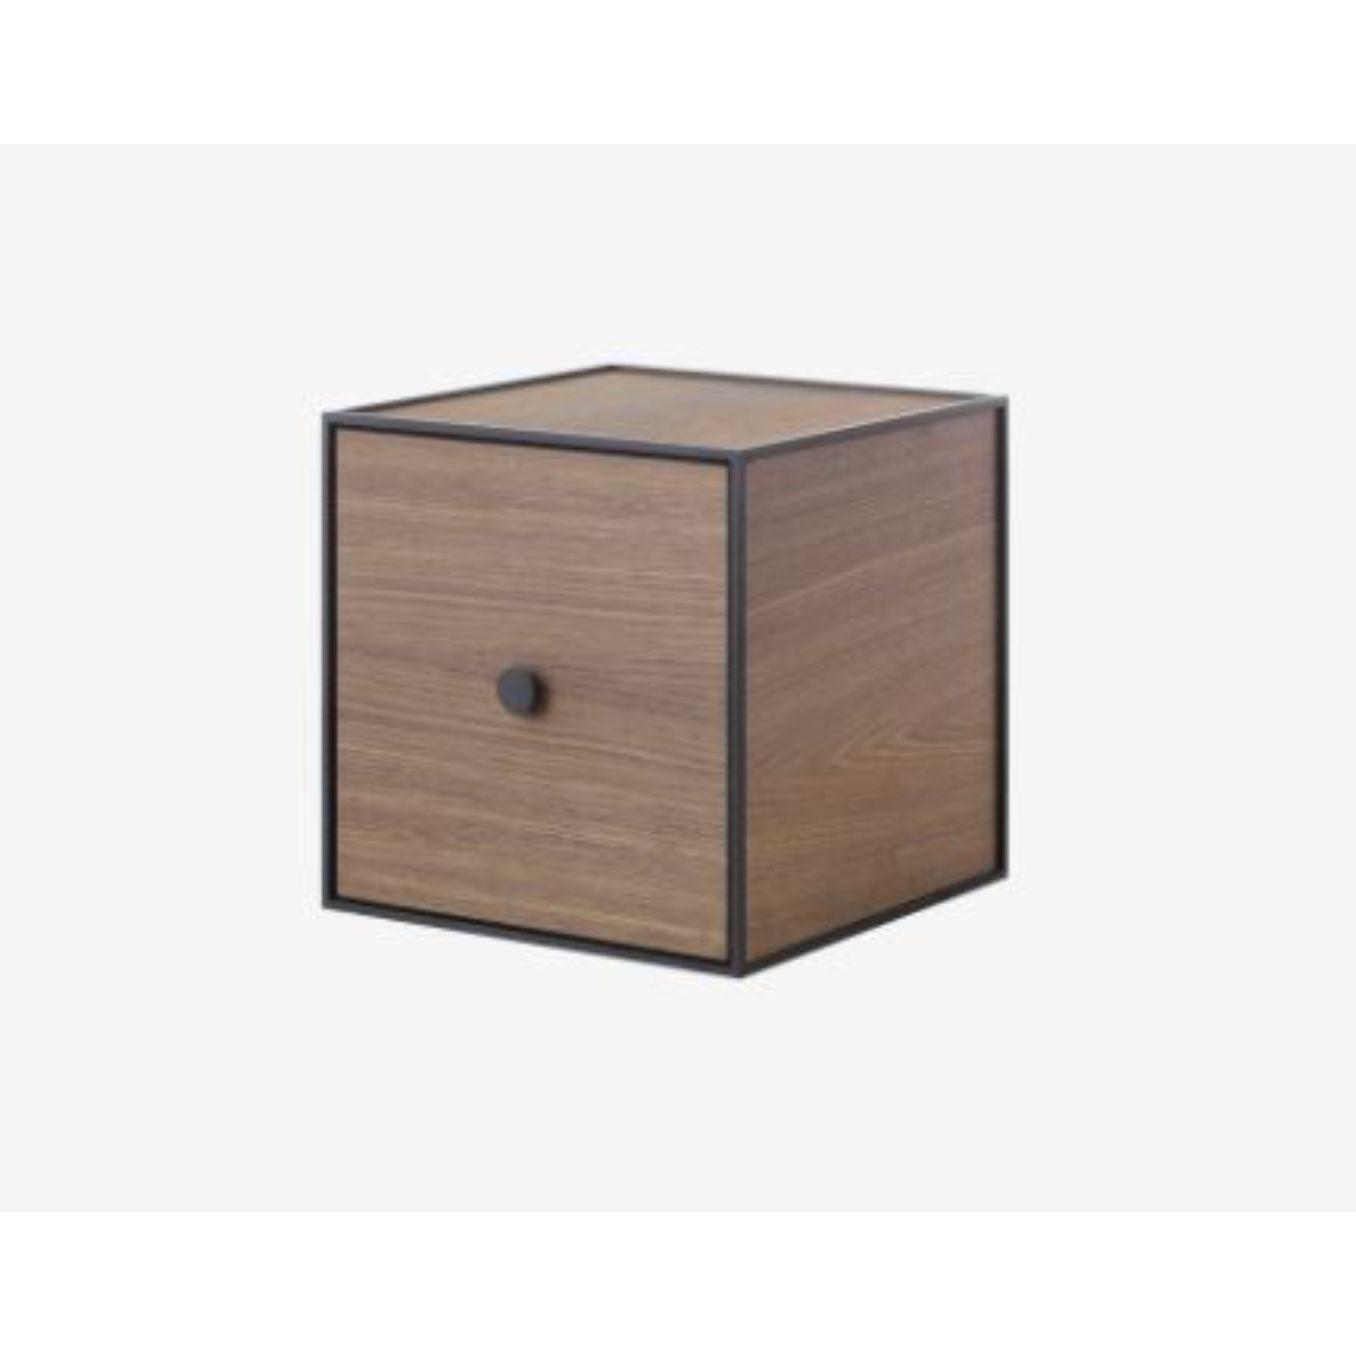 35 smoked Oak frame box with door by Lassen
Dimensions: w 35 x d 35 x h 35 cm 
Materials: Finér, Melamin, Melamin, Melamine, Metal, Veneer
Also available in different colors and dimensions. 

By Lassen is a Danish design brand focused on iconic